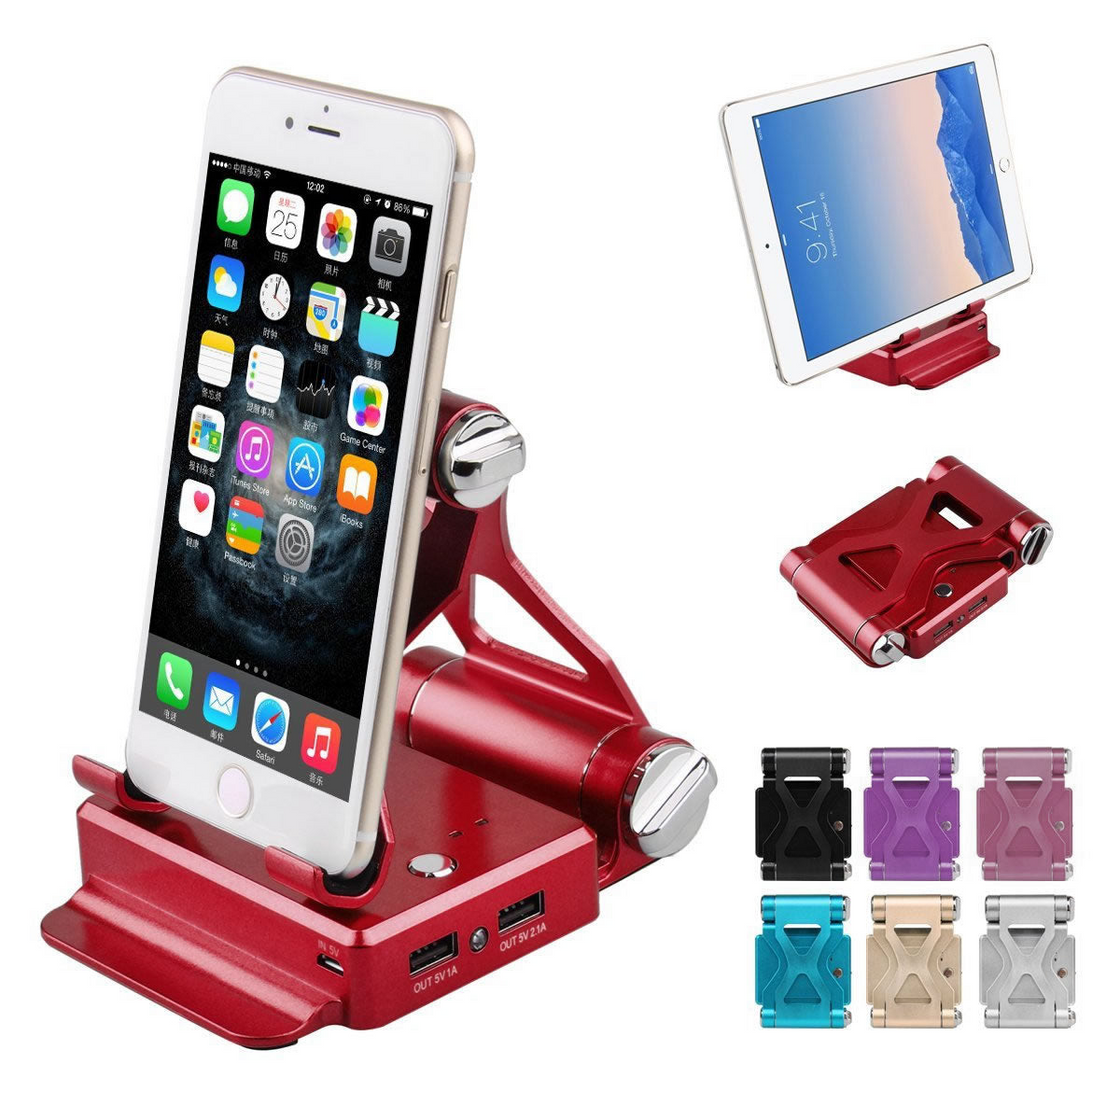 Podium Style Stand with Extended Battery for iPad, iPhone, and Smart Gadgets